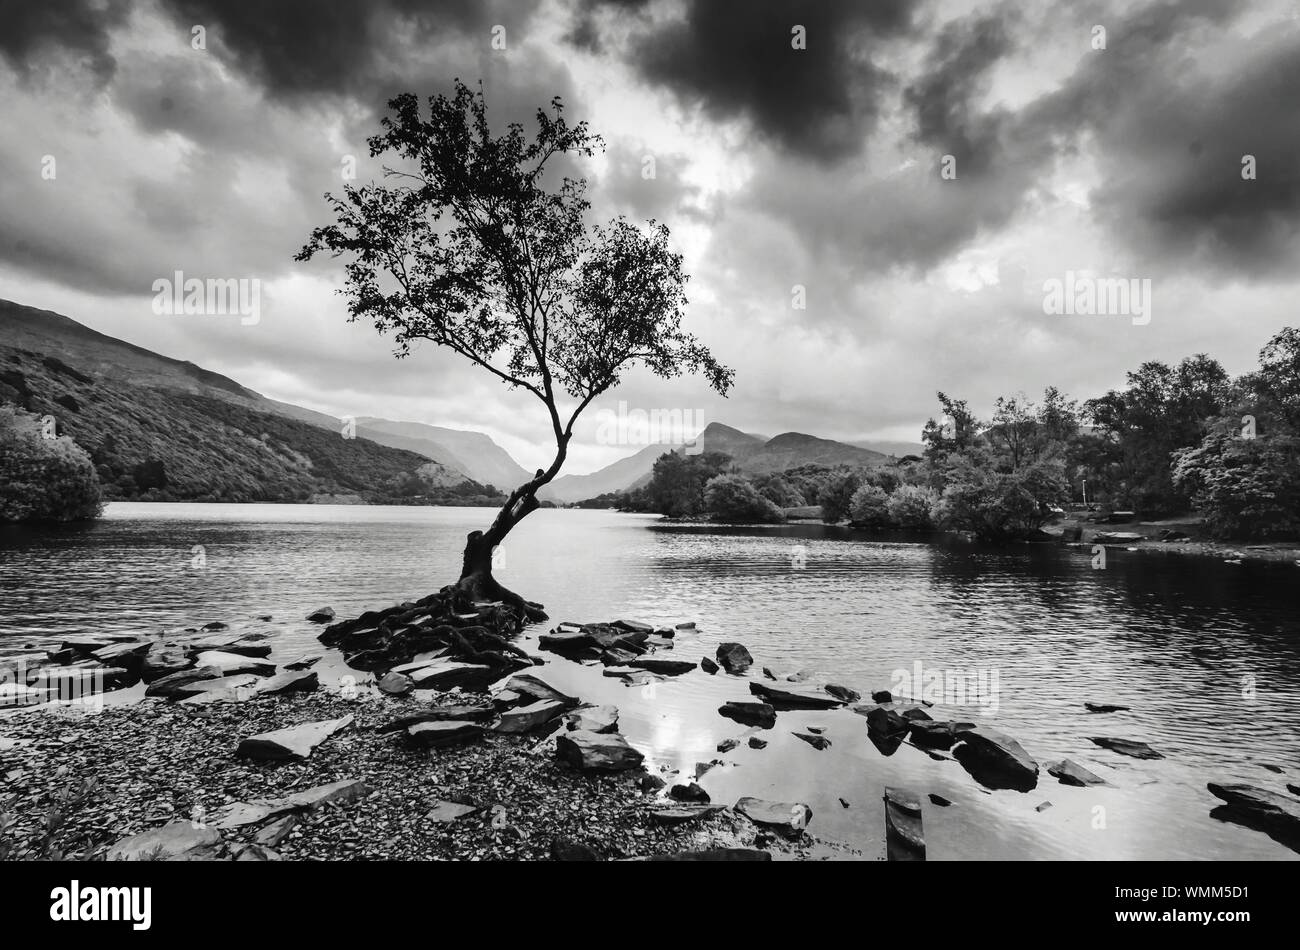 Tree Growing At Llyn Padarn Against Cloudy Sky Stock Photo